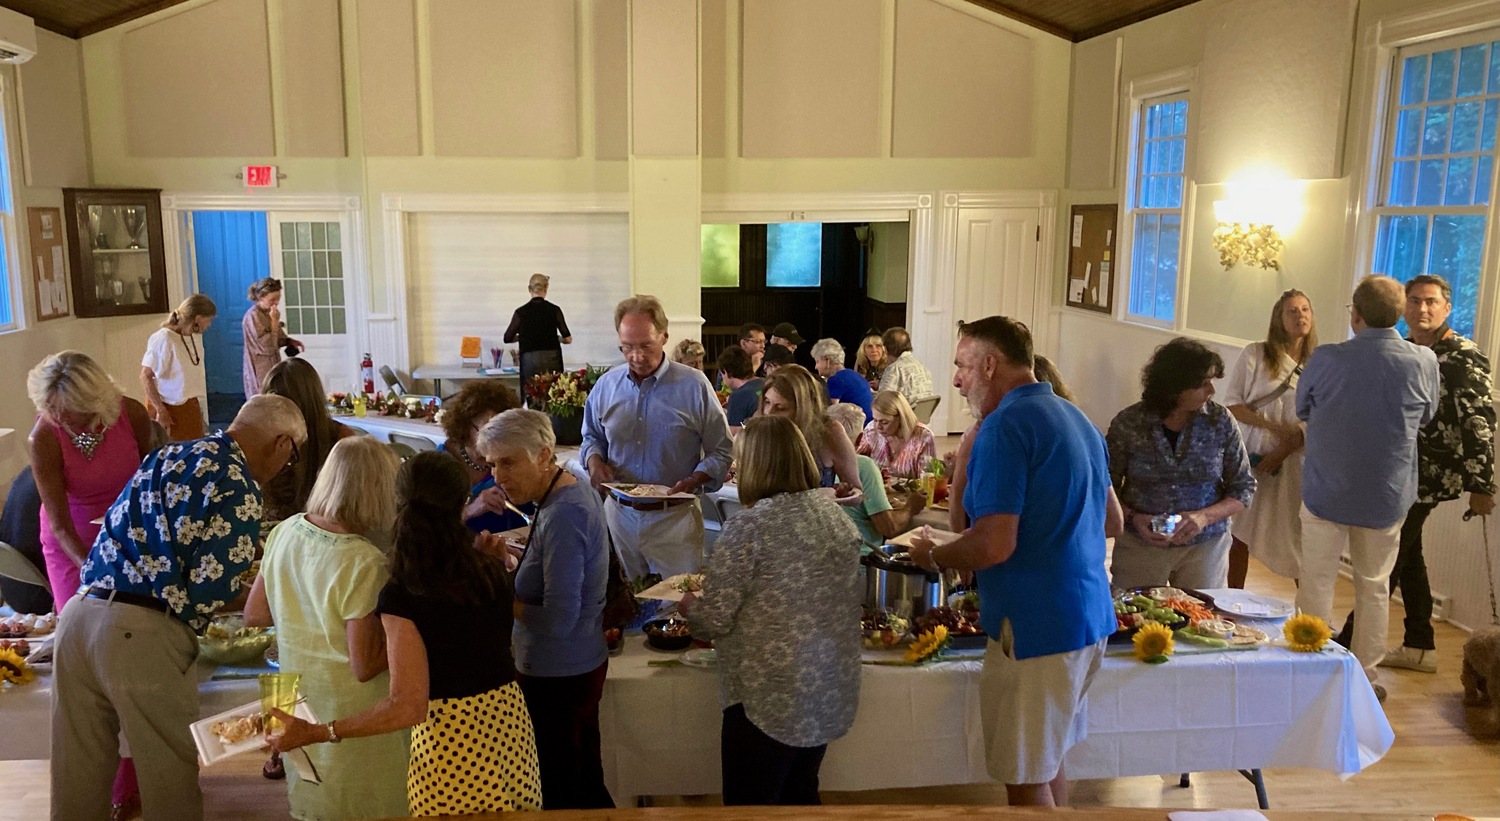 The New Thought Spiritual Center of Eastern Long Island celebrated on Saturday night. with its more than 60 congregation members enjoying a potluck dinner, music and dancing on the stage at the Water Mill Community House. COURTESY NEW THOUGHT SPIRITUALITY CENTER